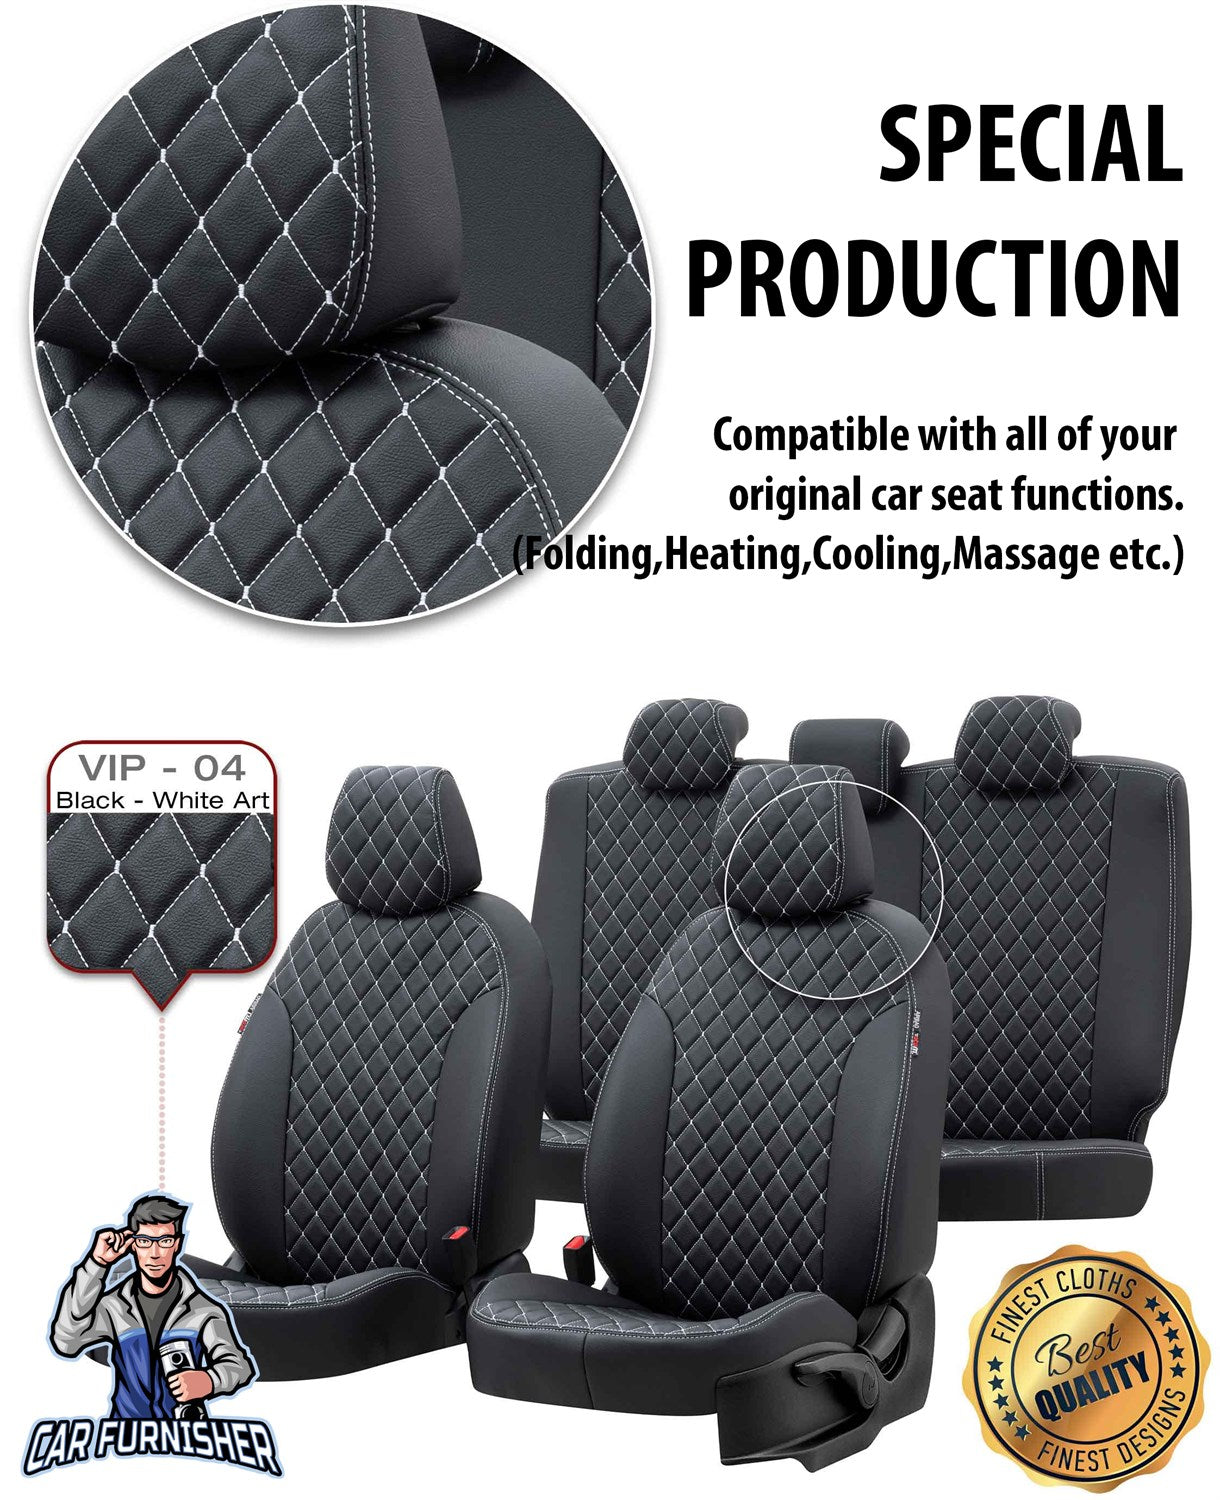 Chery Alia Seat Covers Madrid Leather Design Blue Leather